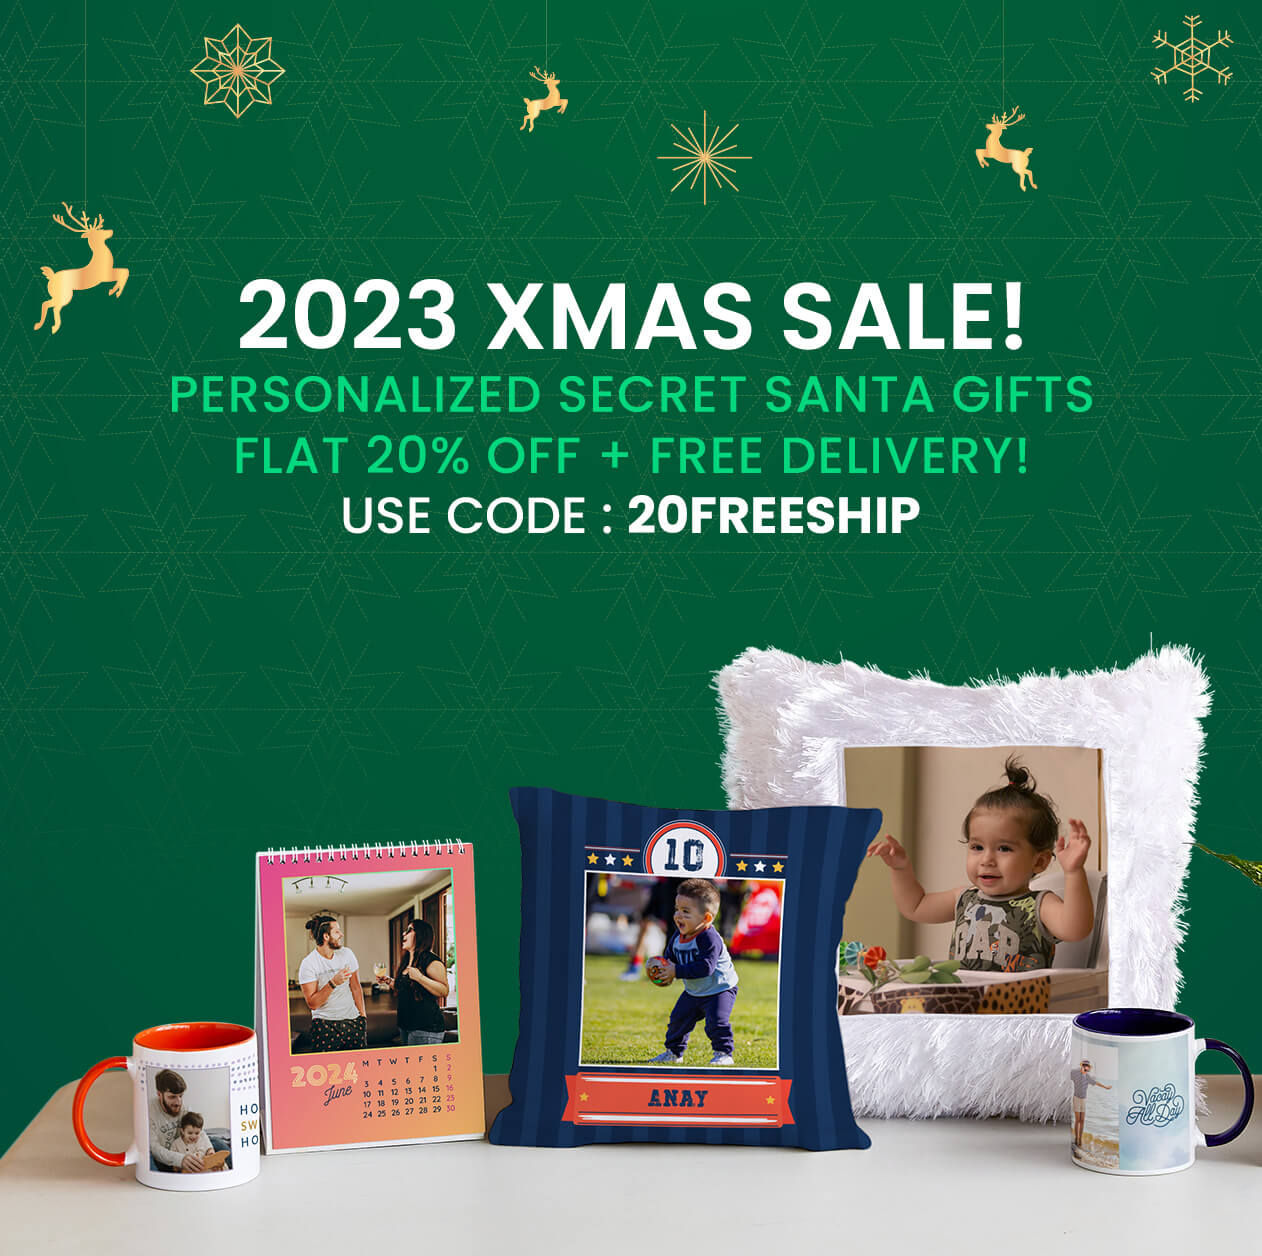 Best Christmas Gift Ideas | Xmas Gifts for 2023 - FNP